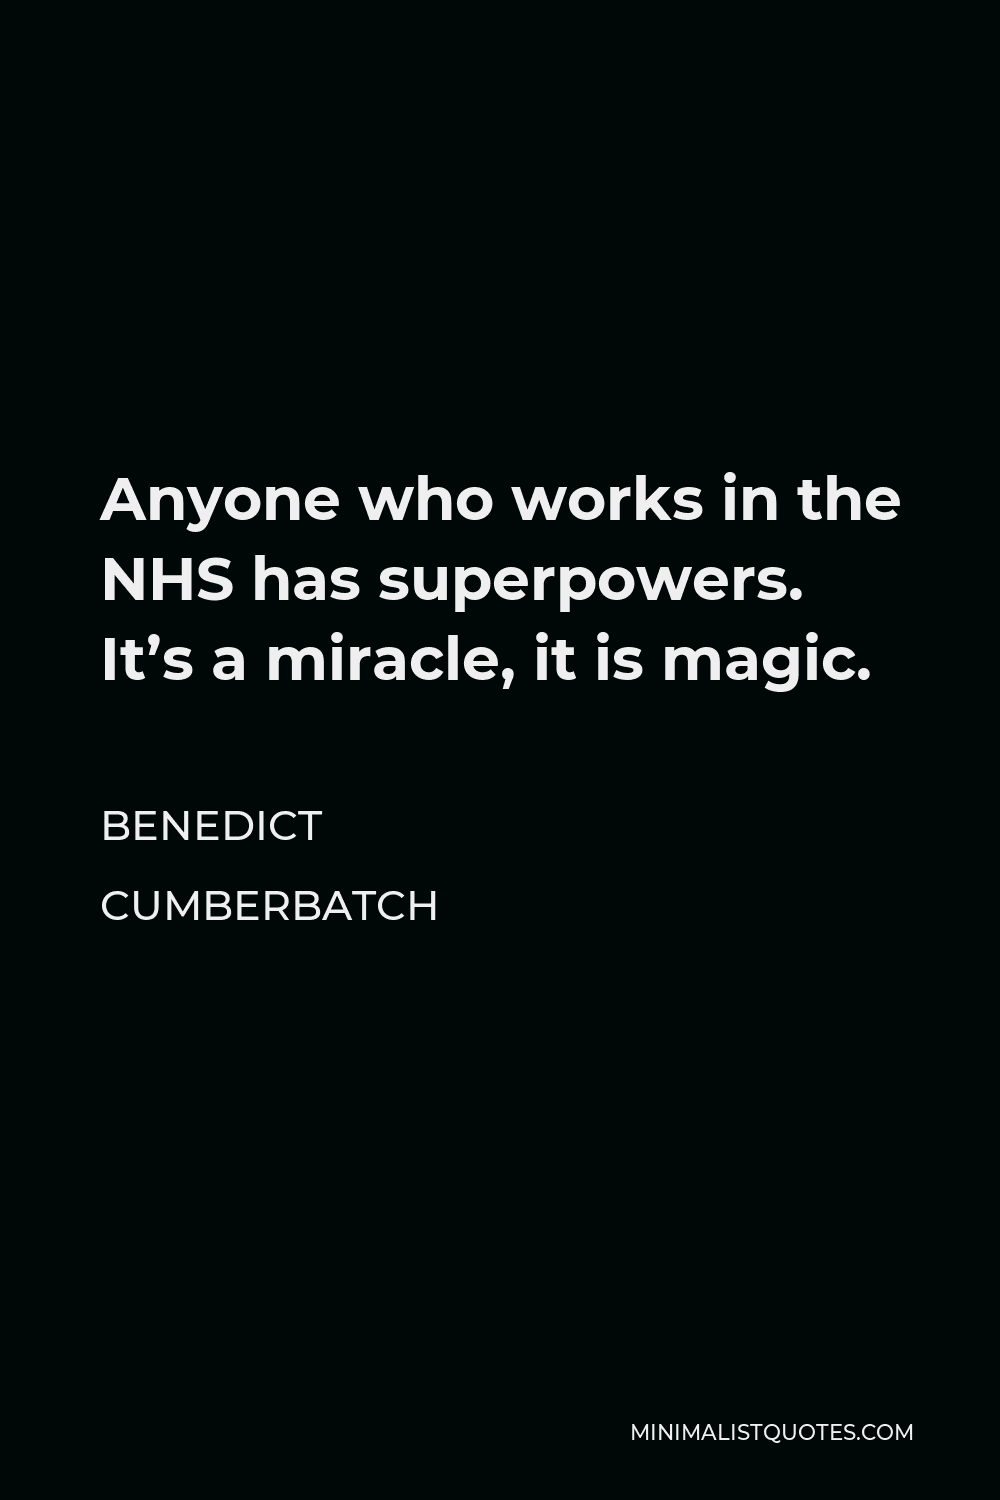 Benedict Cumberbatch Quote - Anyone who works in the NHS has superpowers. It’s a miracle, it is magic.